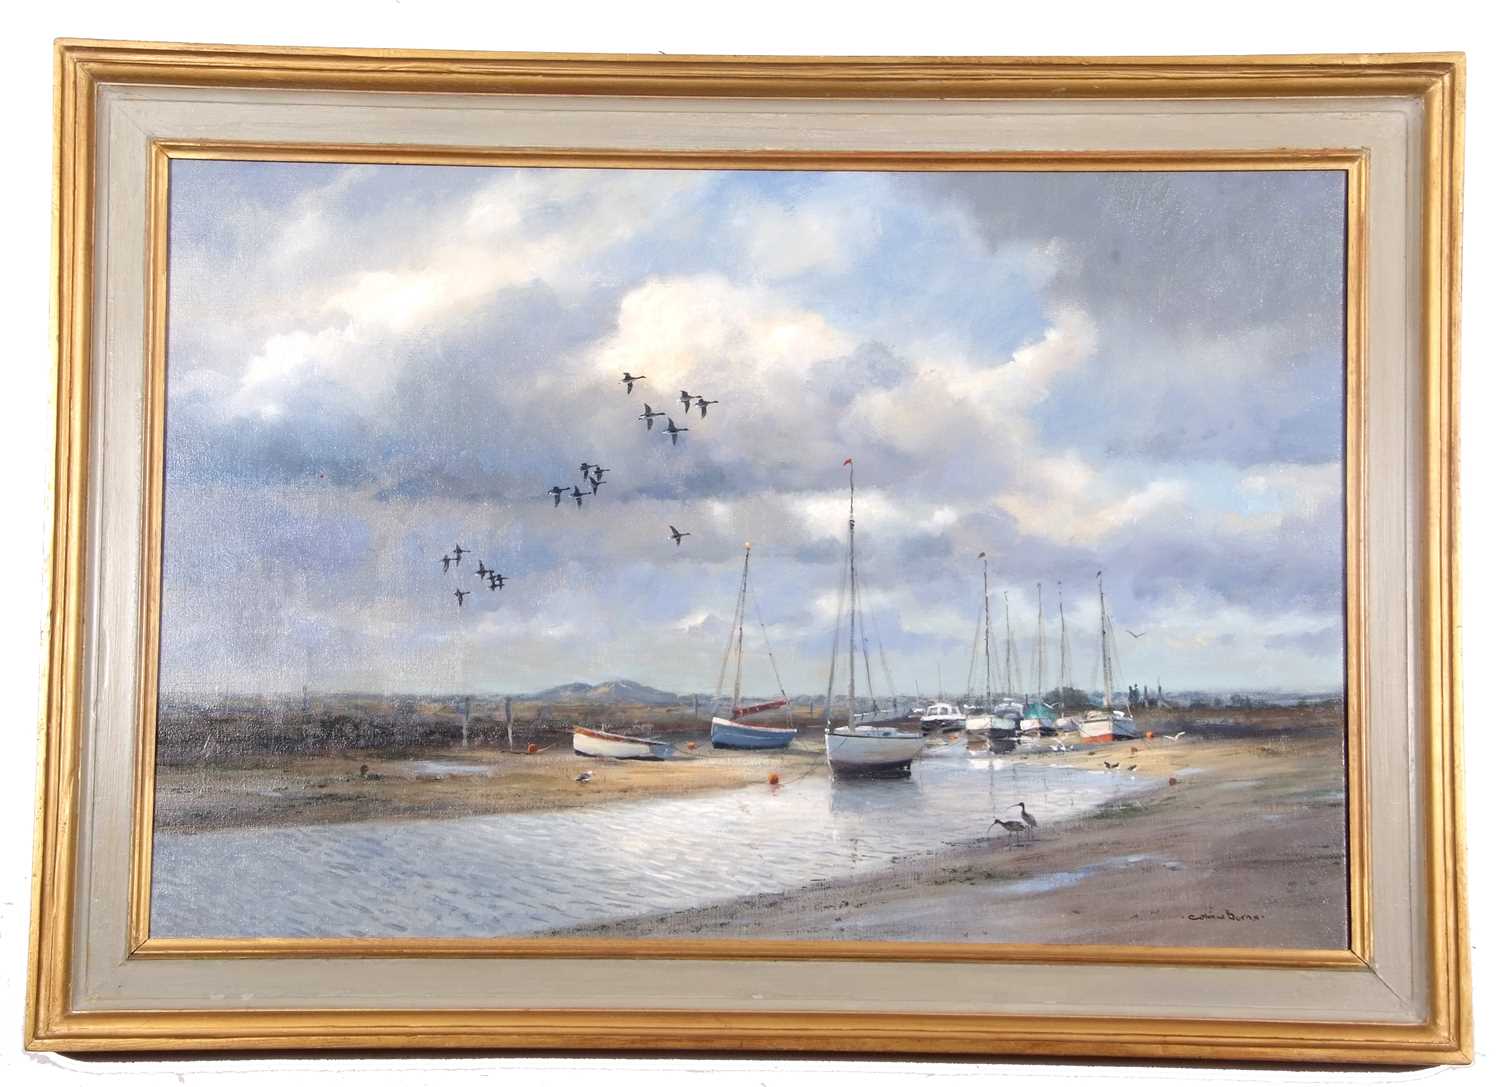 Colins W Burns (British b. 1944) "Burnham Overy", oil on canvas 20" x 30" signed Colin W Burns lower - Image 3 of 3